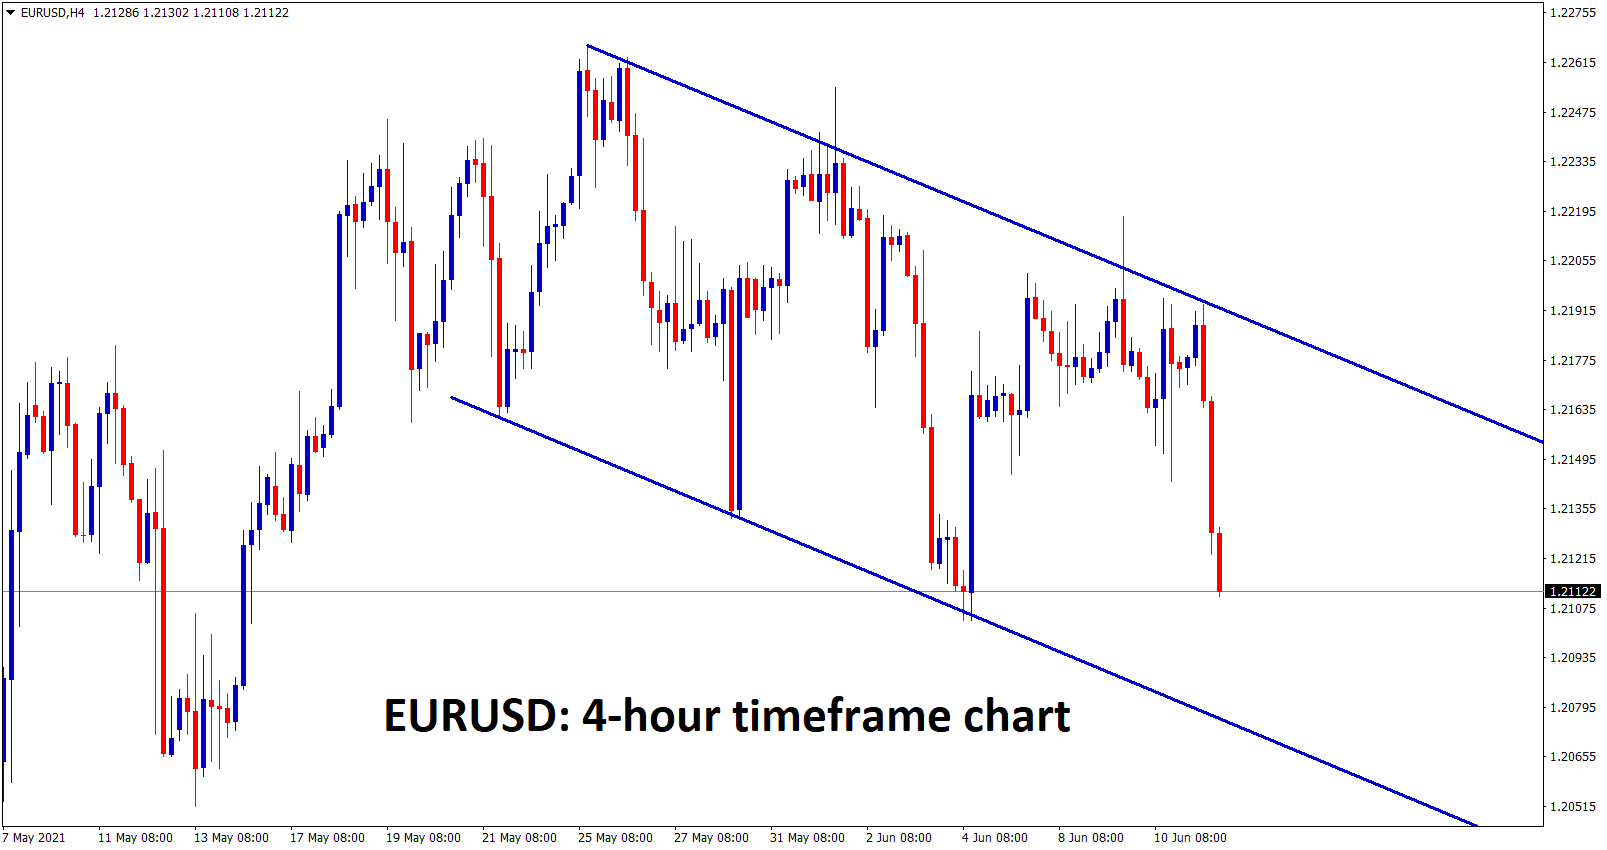 EURUSD is moving in a descending channel forming lower highs and lower lows